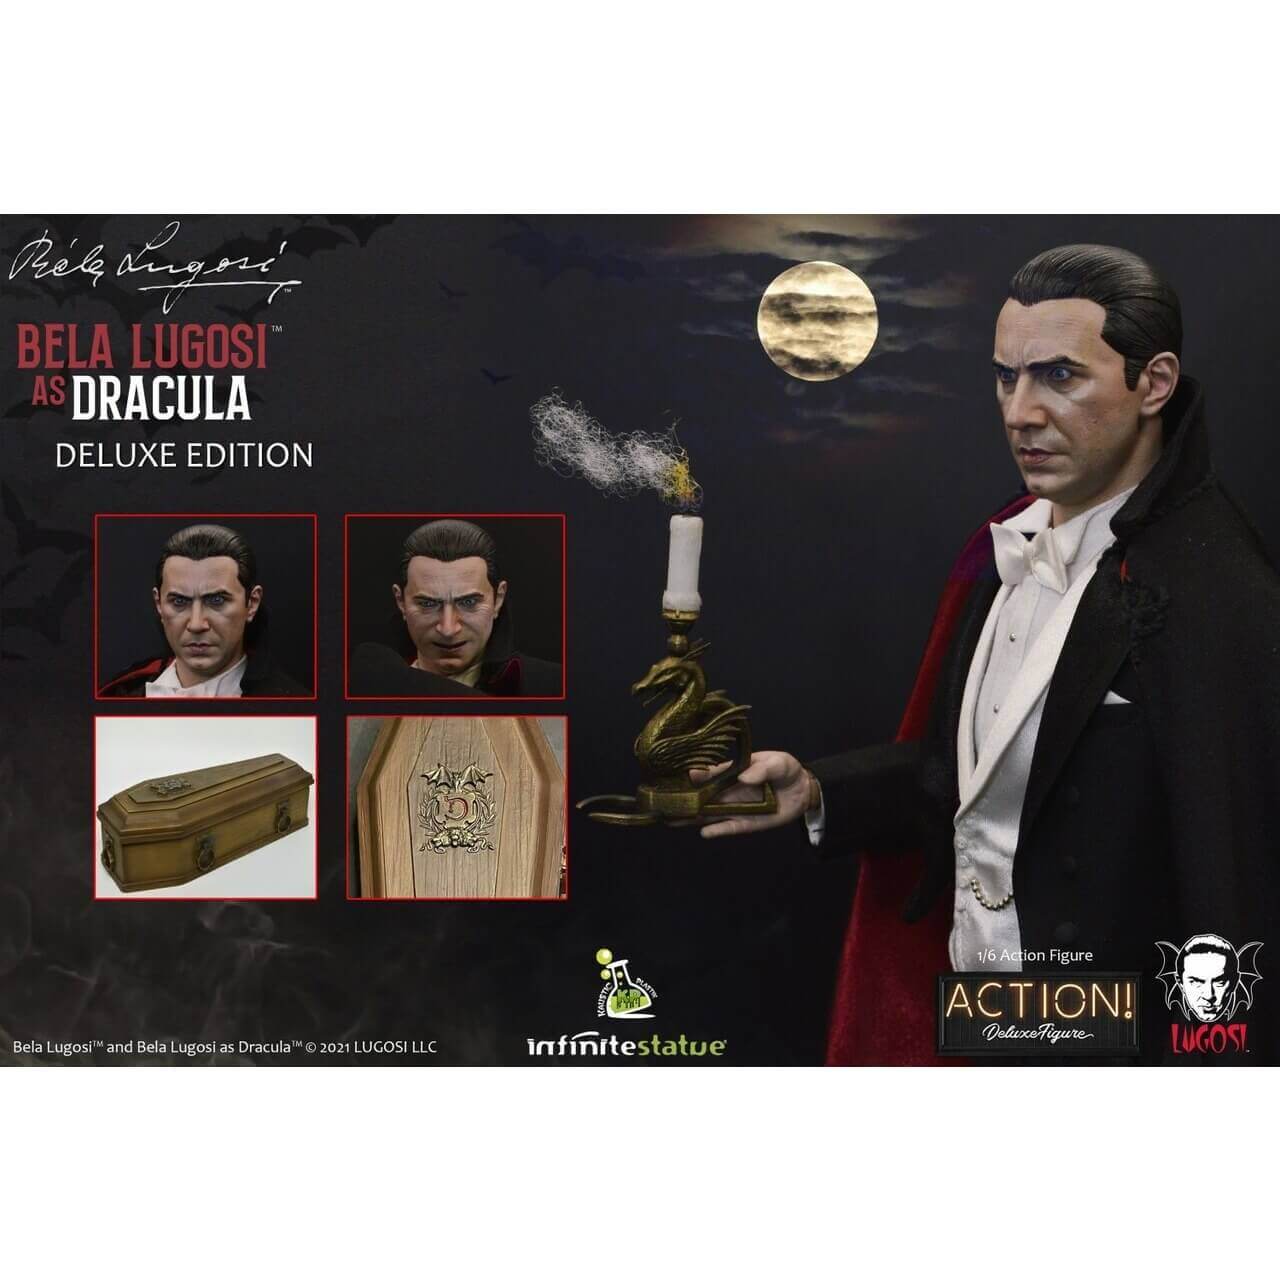 Bela Lugosi as Dracula Deluxe Limited Edition Figure